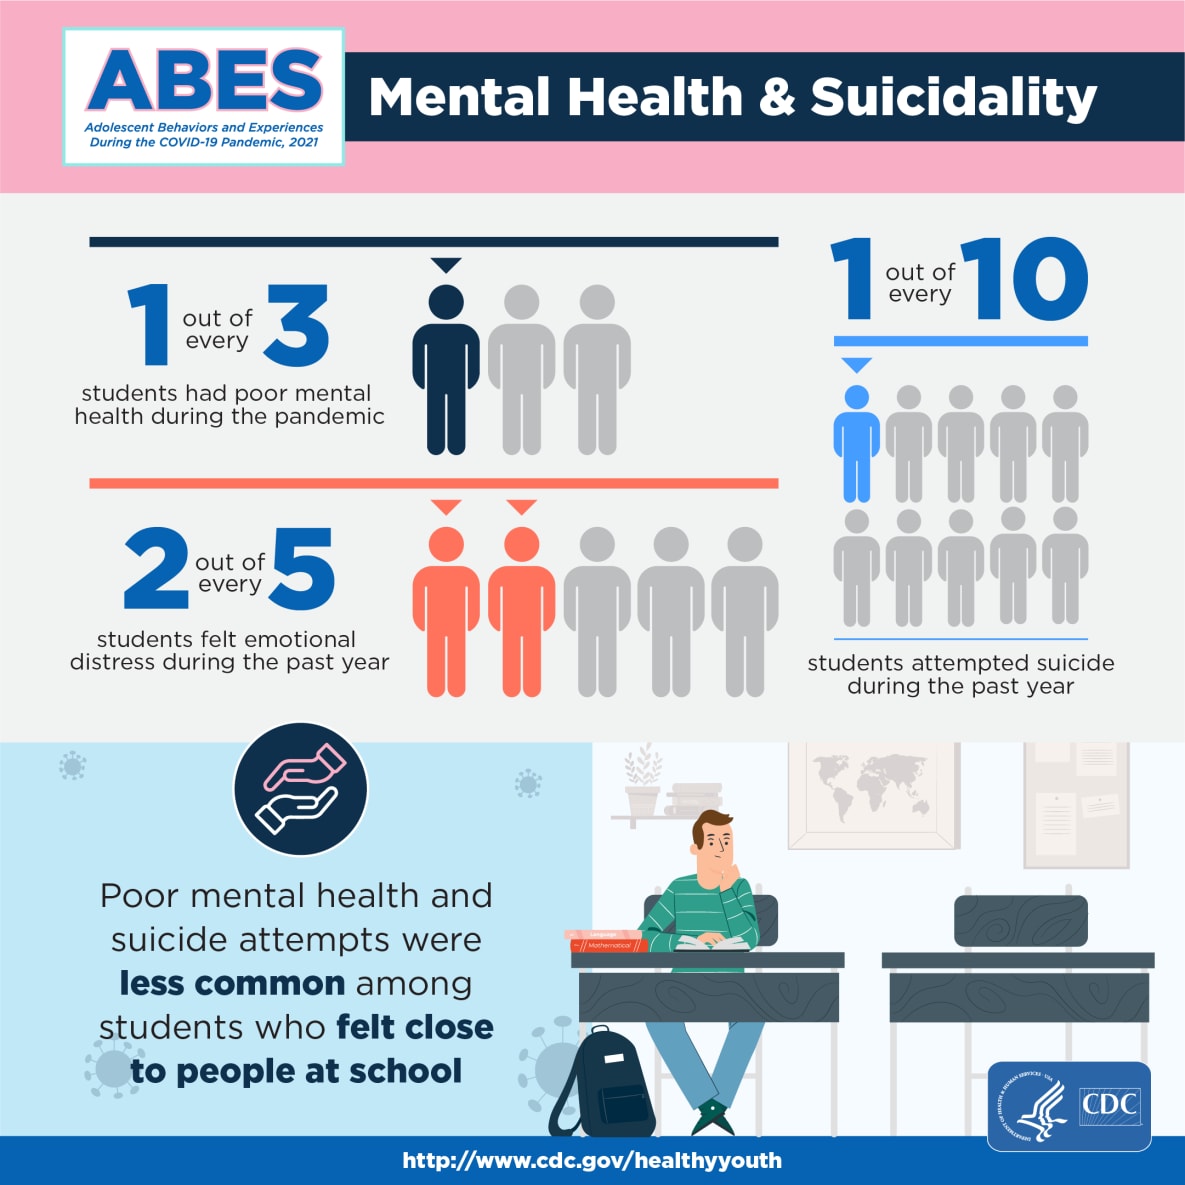 DASH ABES Social Mental Health & Suicidality infographic